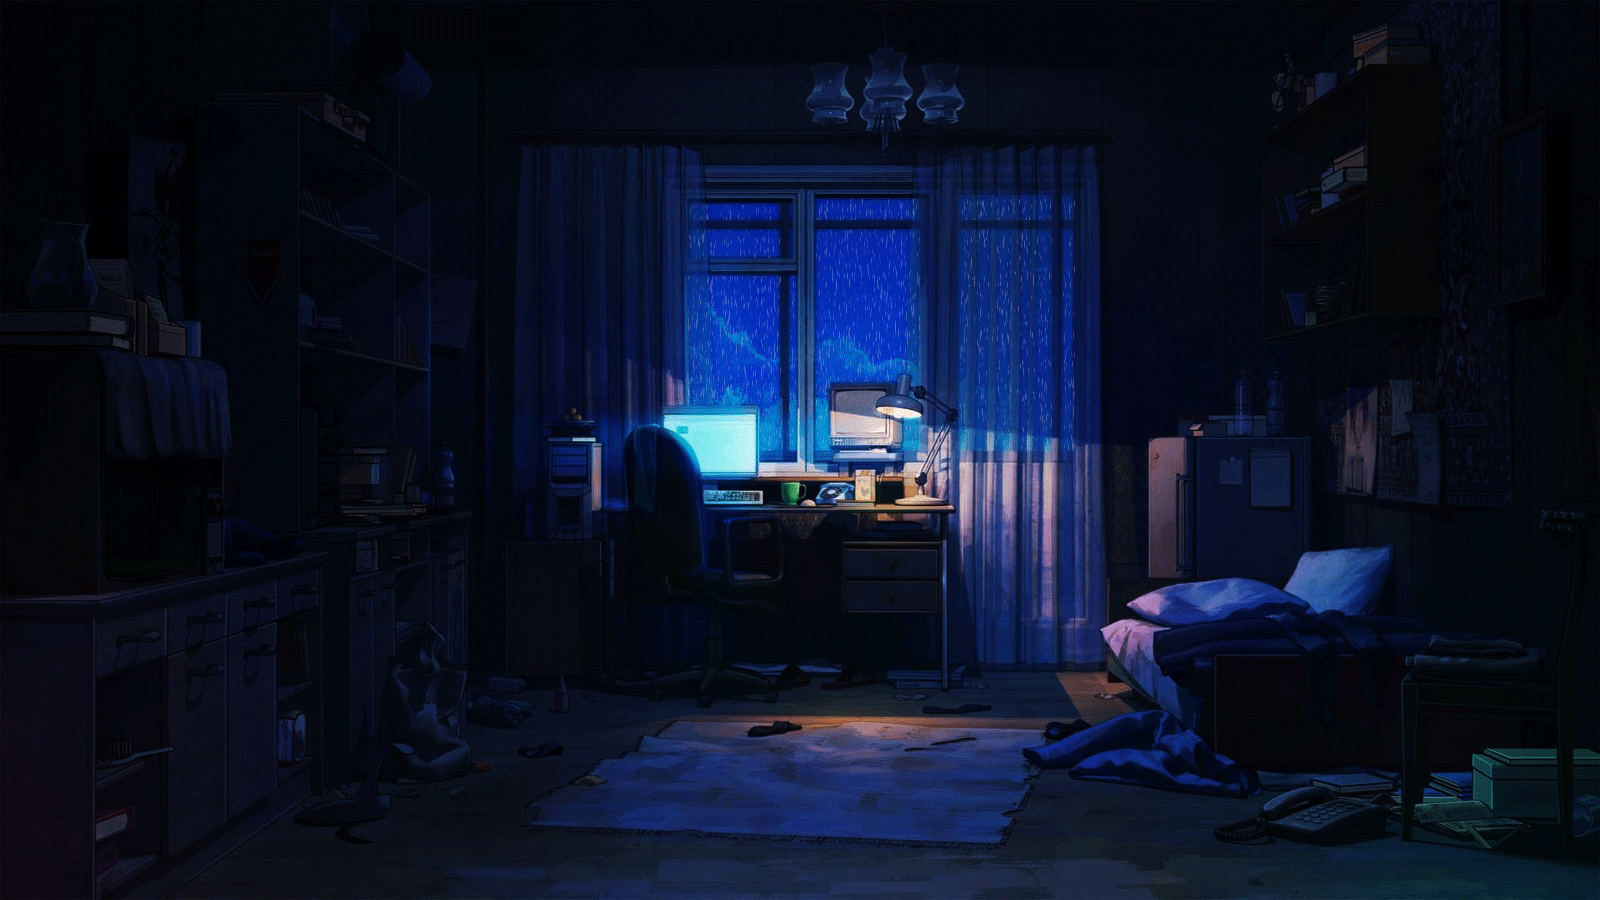 Aesthetic Anime Room HD Wallpapers - Wallpaper Cave